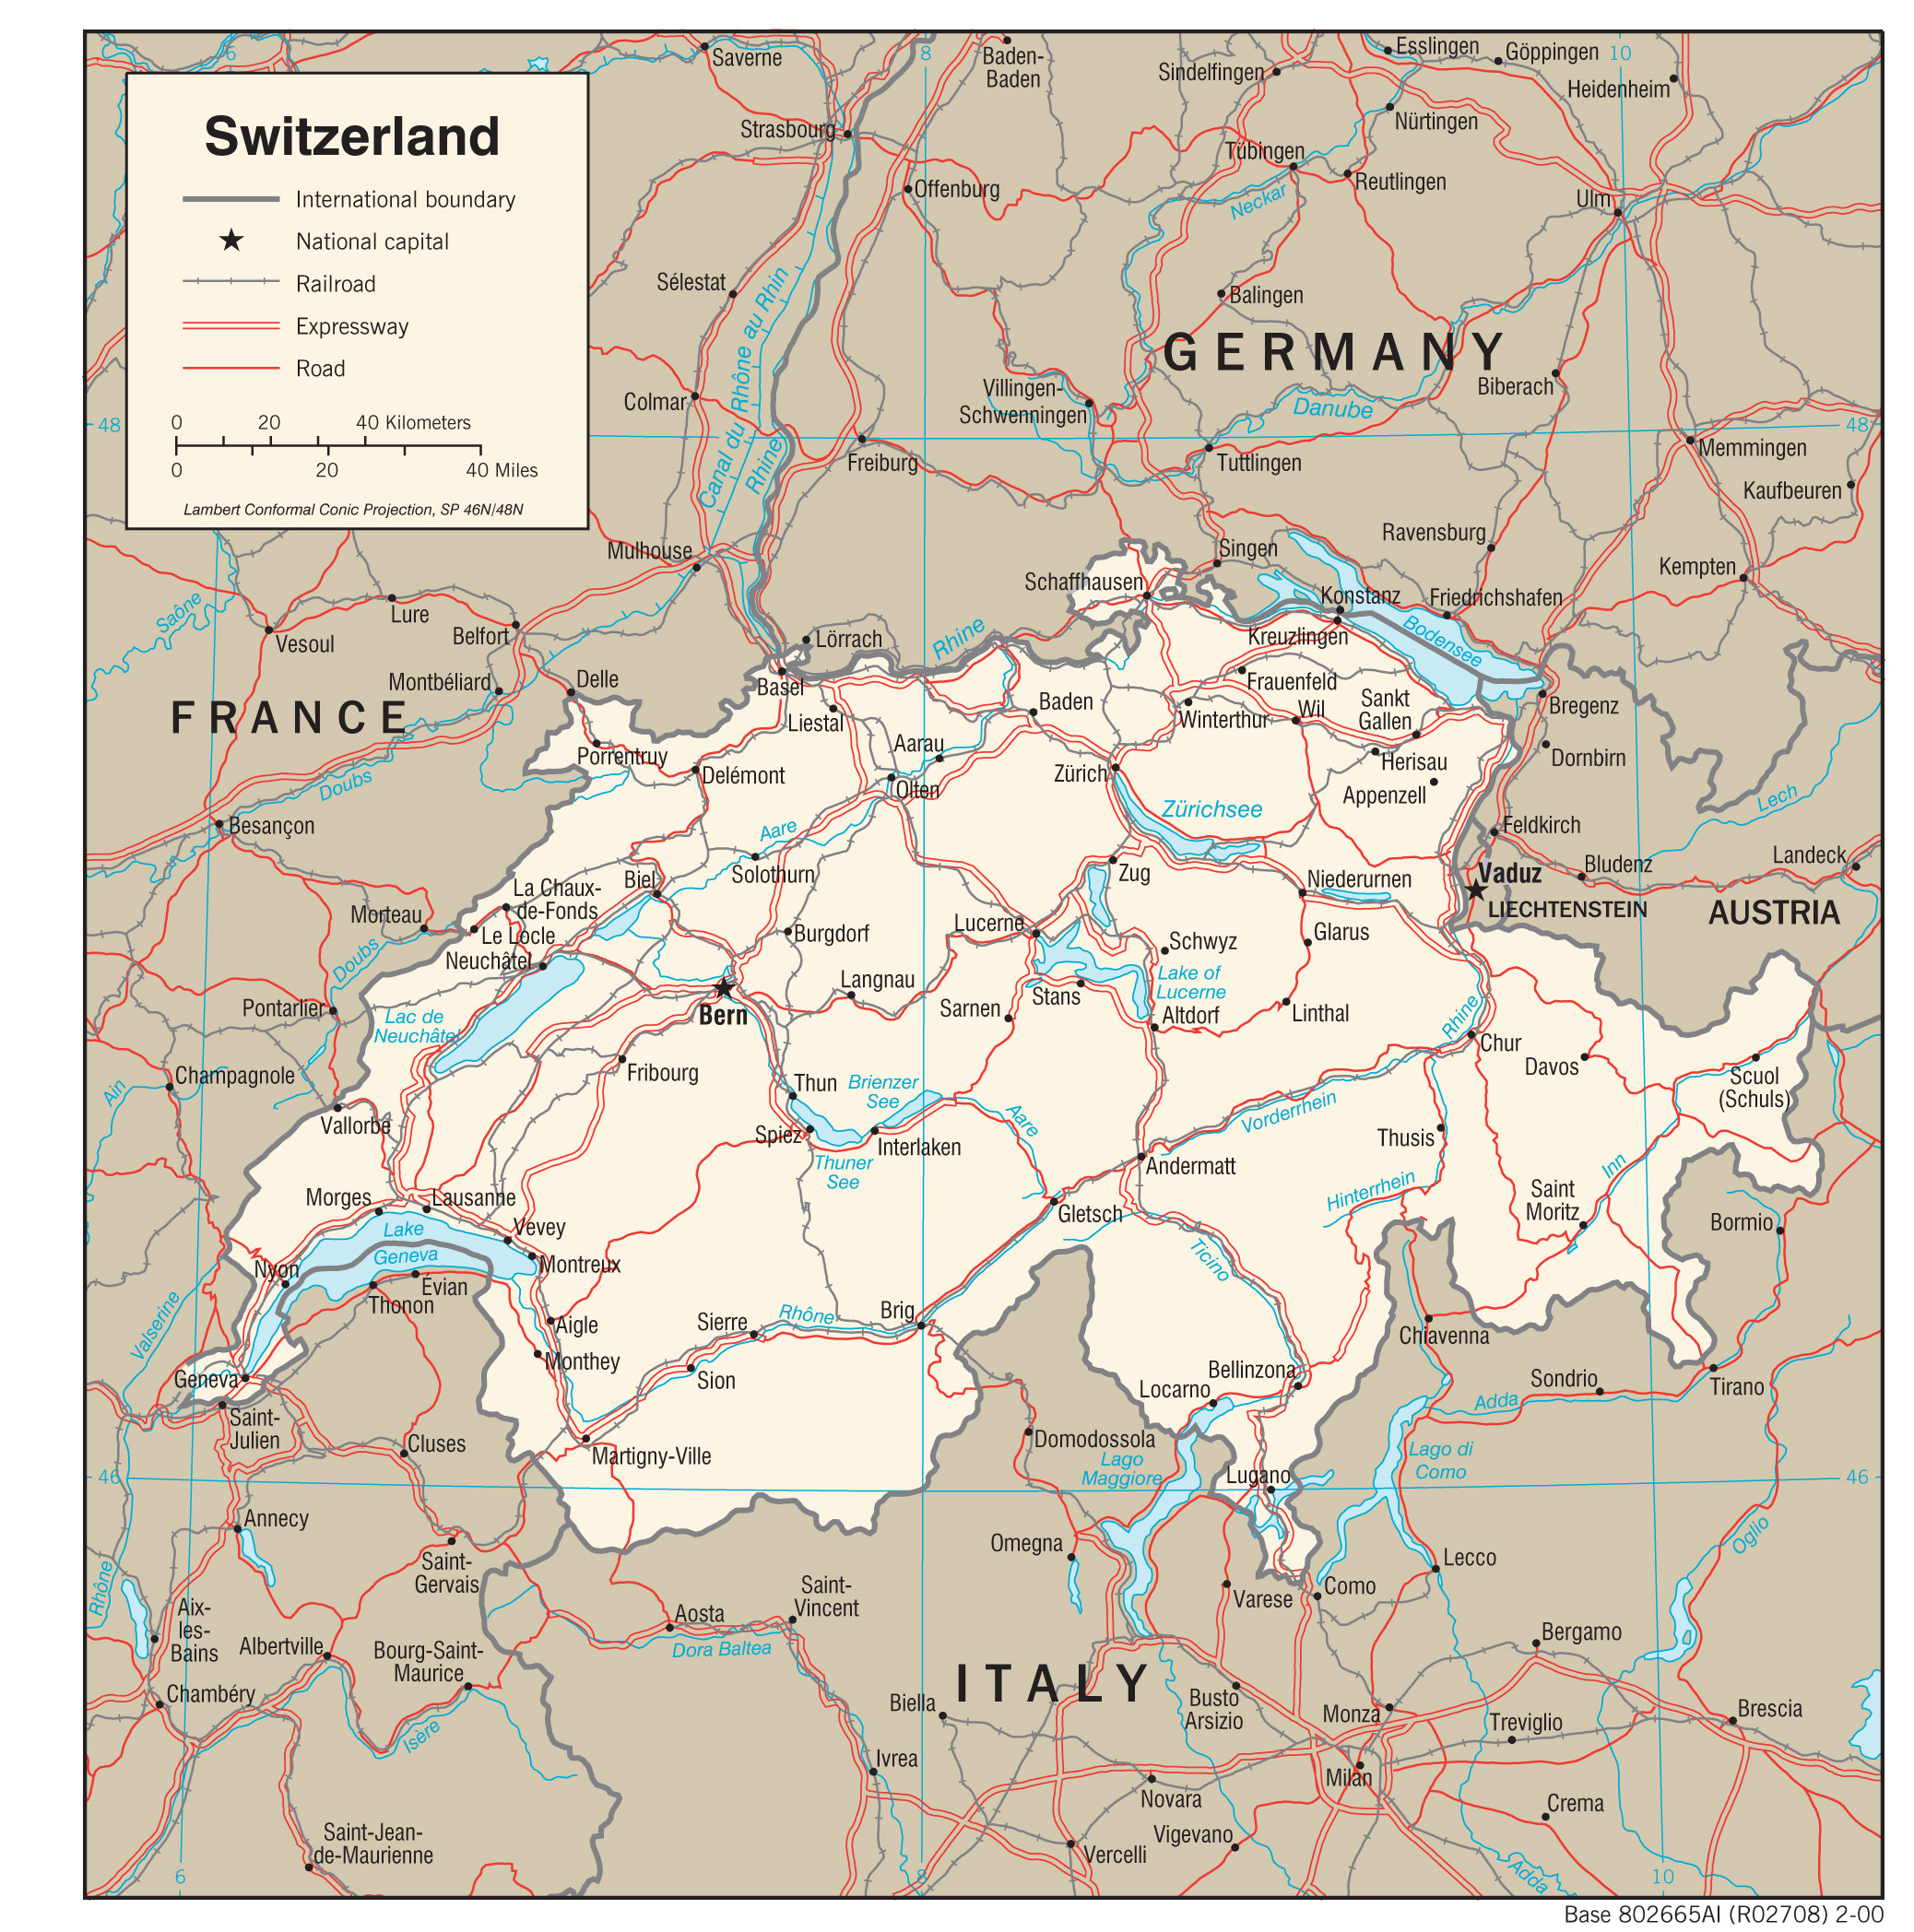 Switzerland Maps - Perry-Castañeda Map Collection - UT Library Online